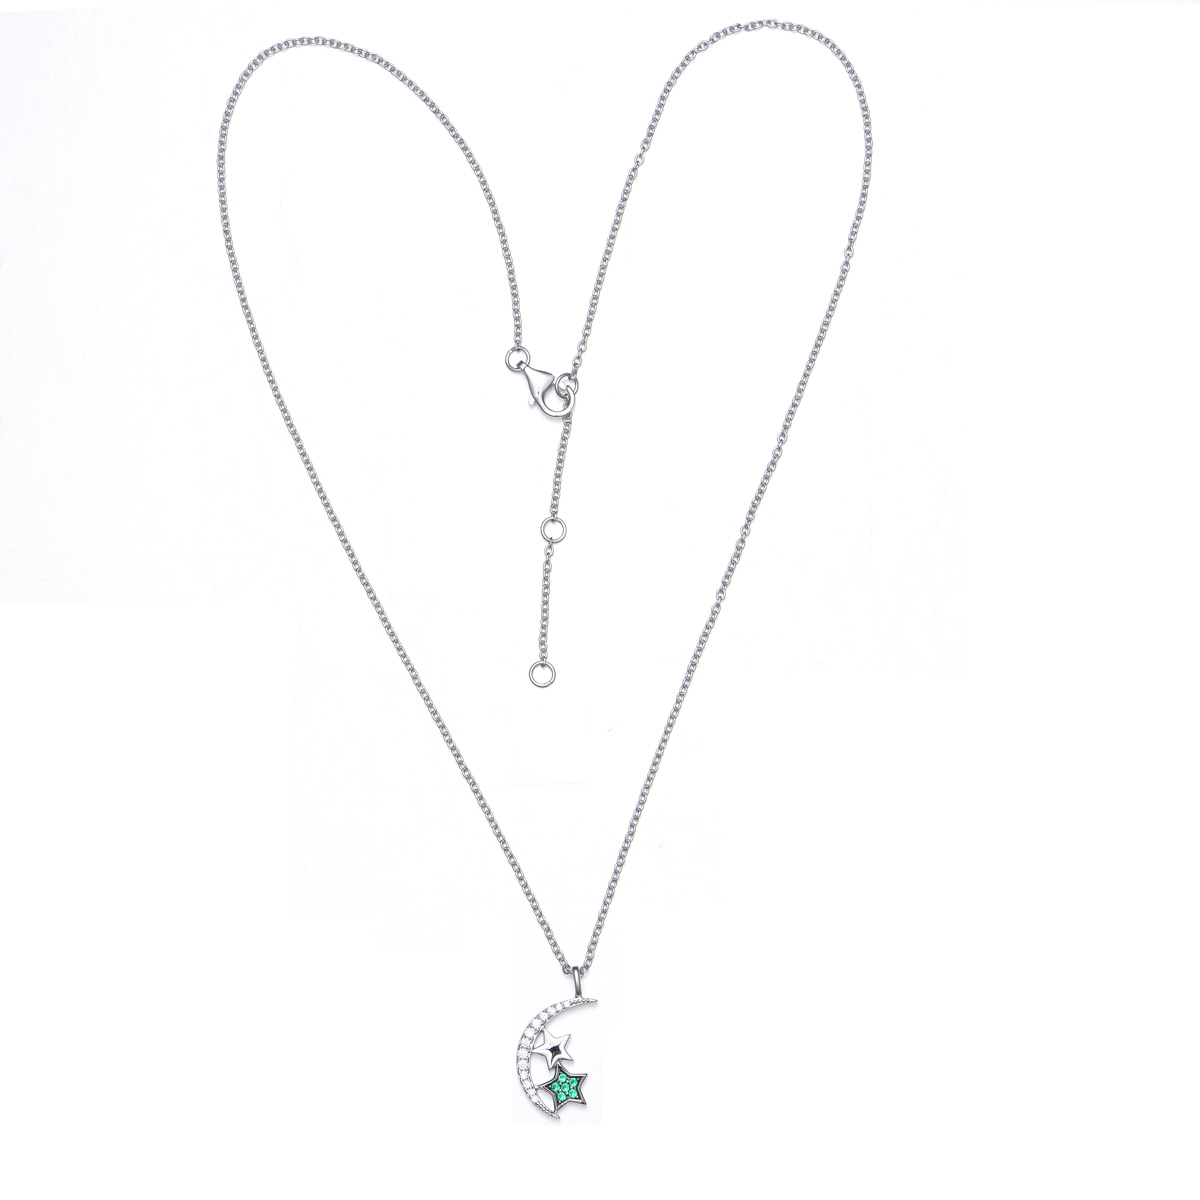 star and moon pendant necklace